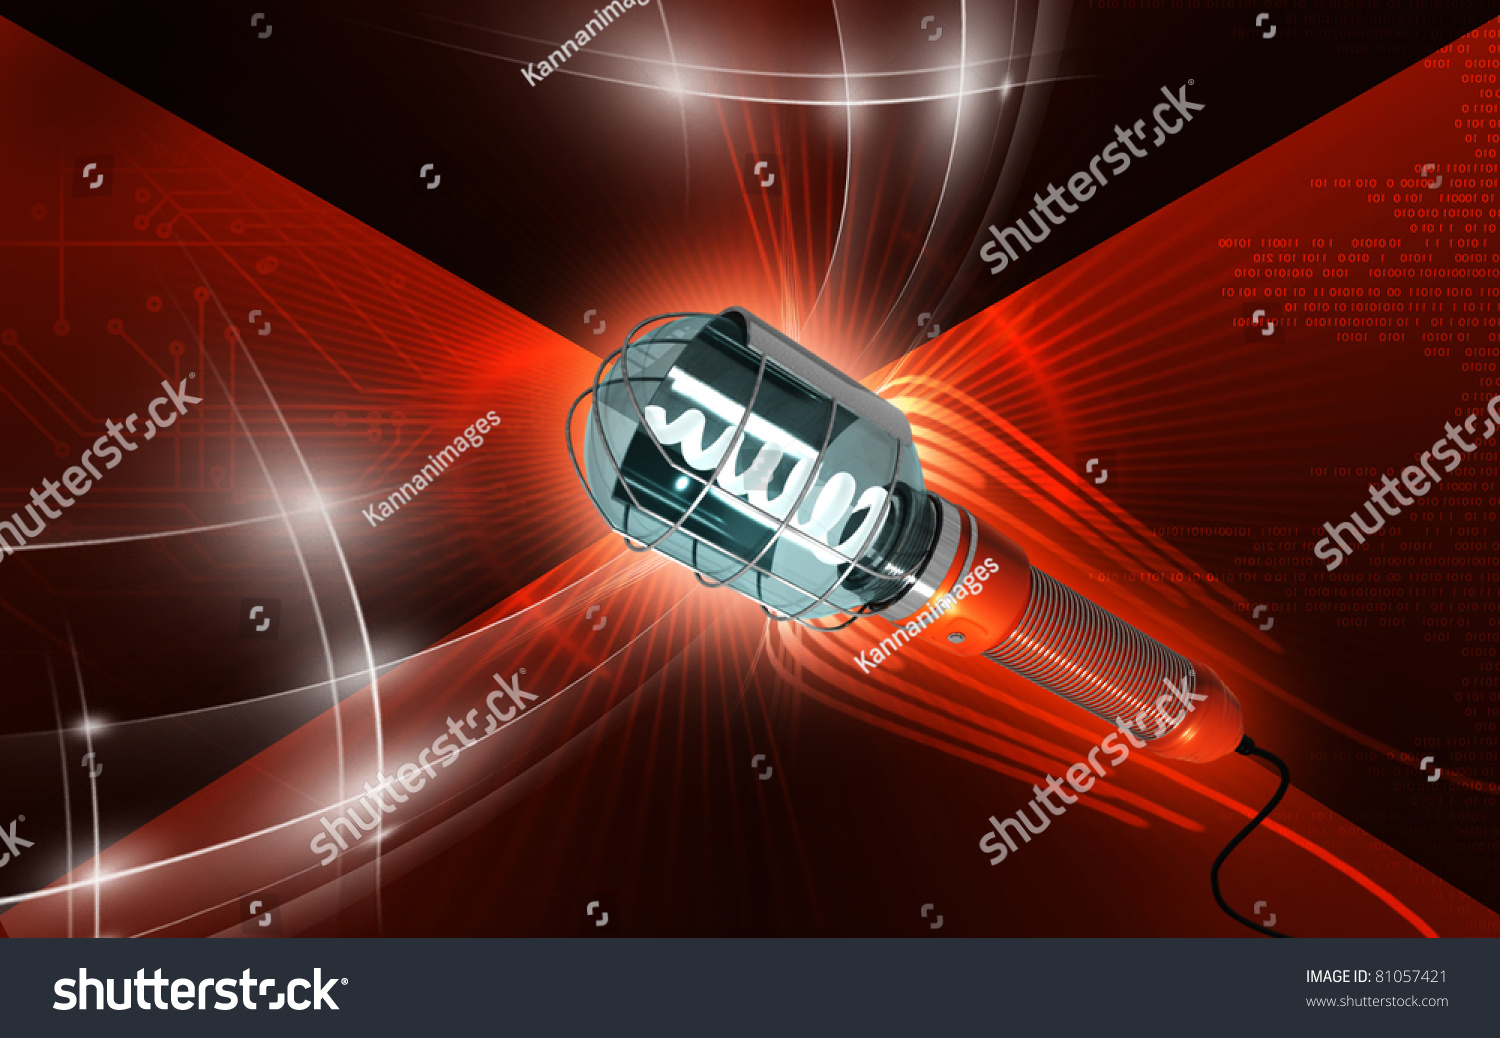 Digital Illustration Wire Cage Work Light Stock Illustration 81057421 - wre cage decal roblox